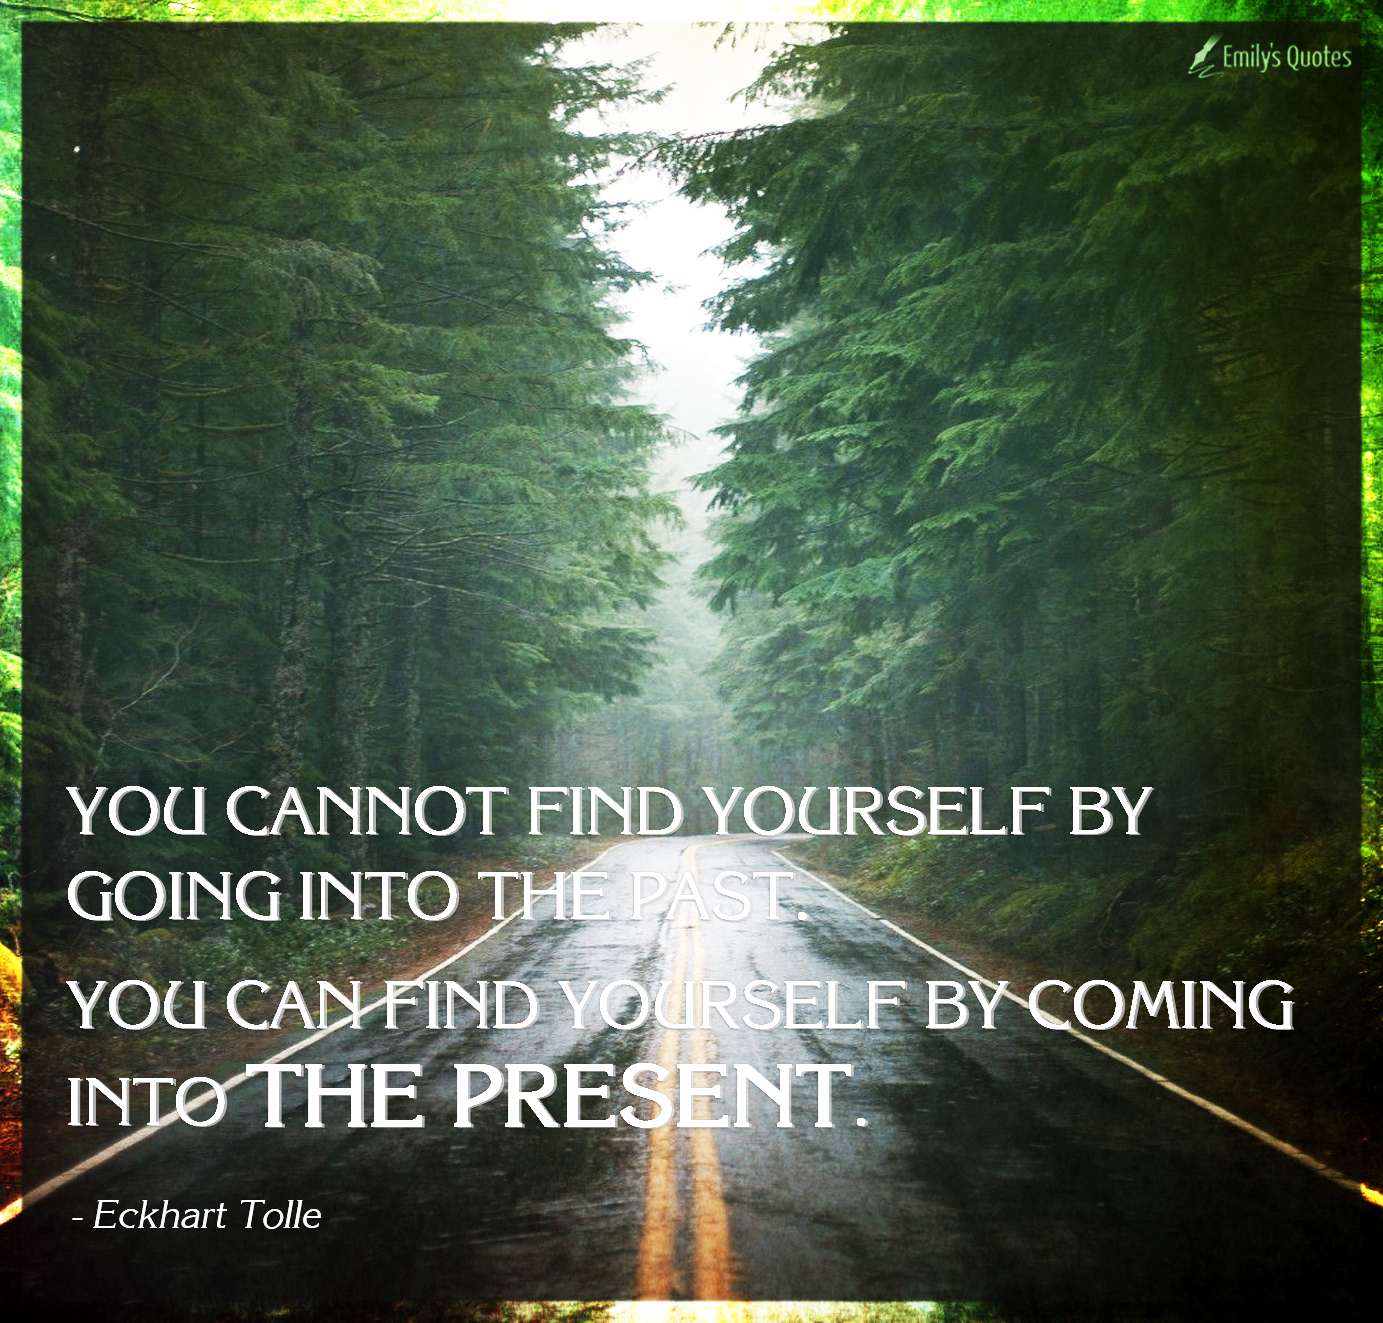 You cannot find yourself by going into the past. You can find yourself